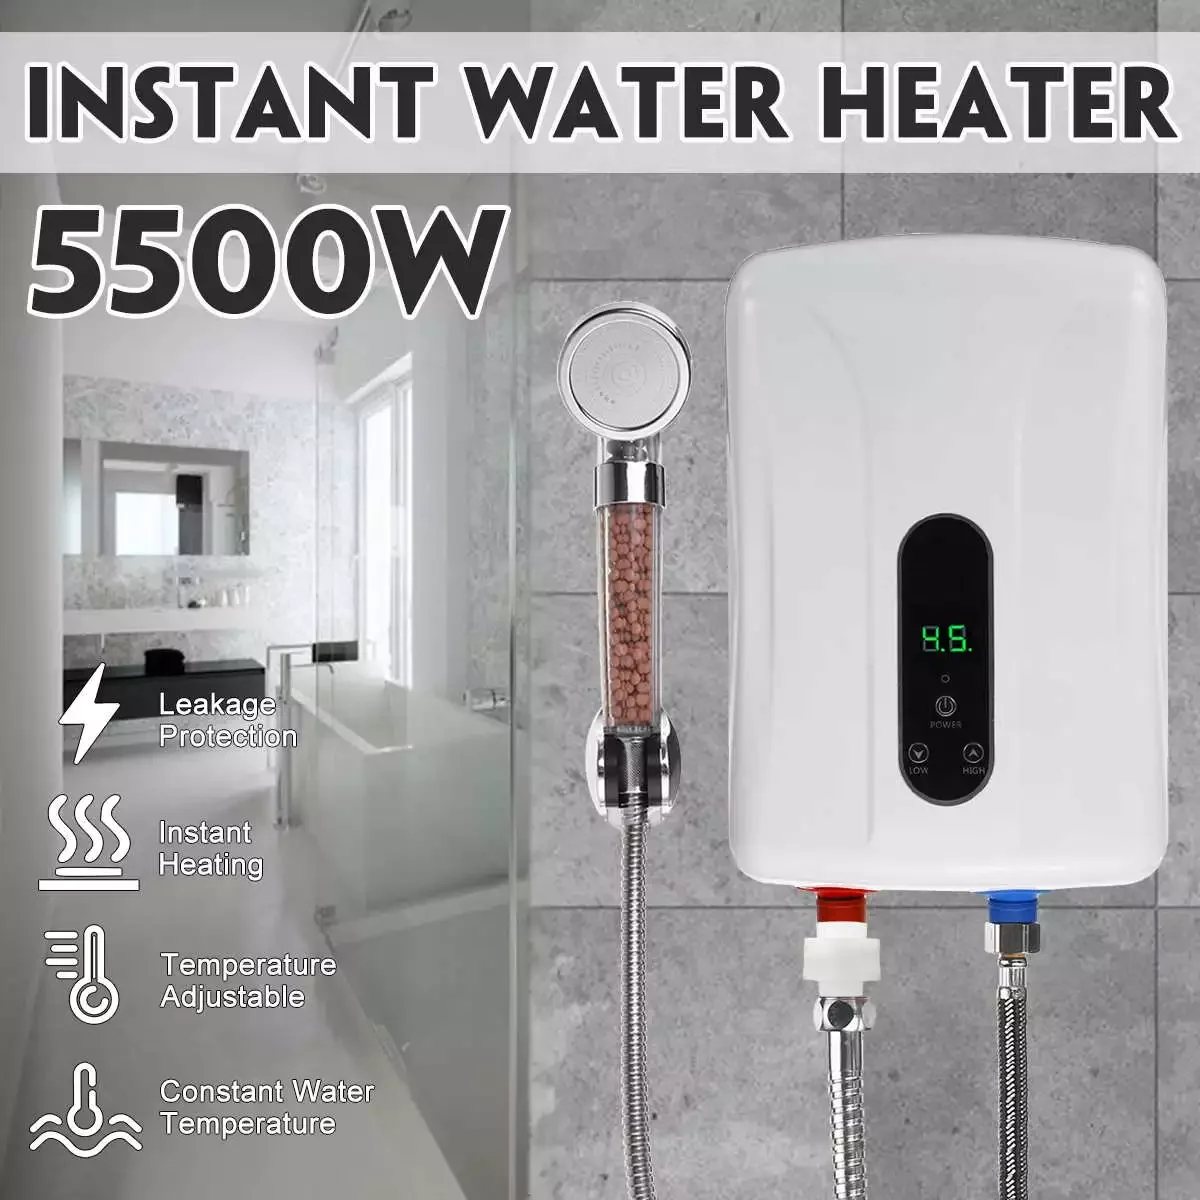 Enlarge 5500W 220V Instant Electric Water Heater Bathroom Kitchen Smart Touch Tankless Water Heater Temperature Display Heating Shower